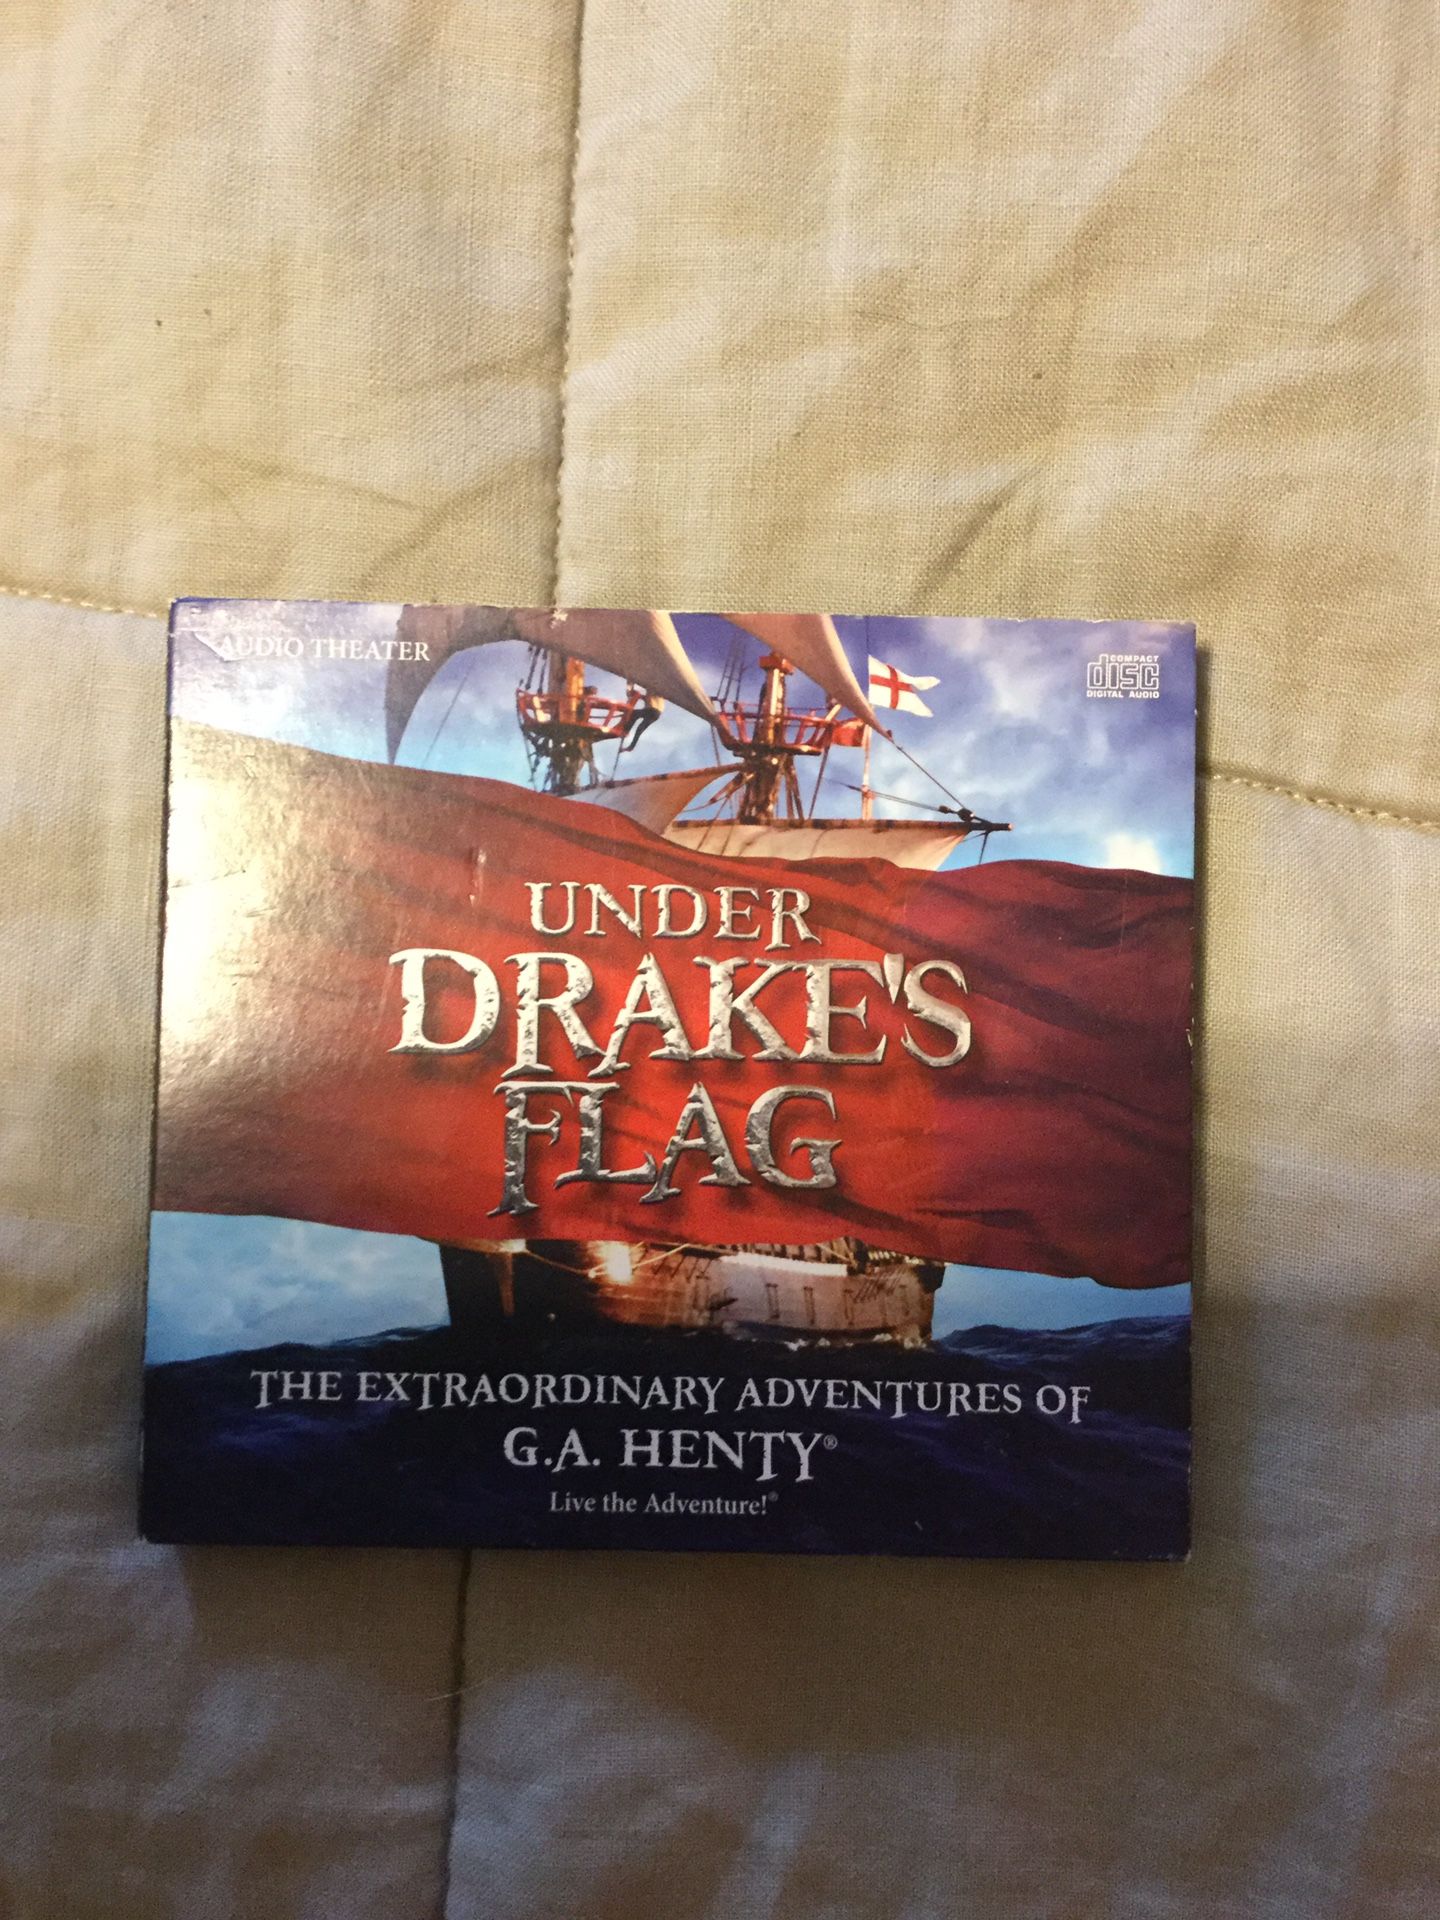 New and Sealed! Under Drakes Flag by G. A. Henry